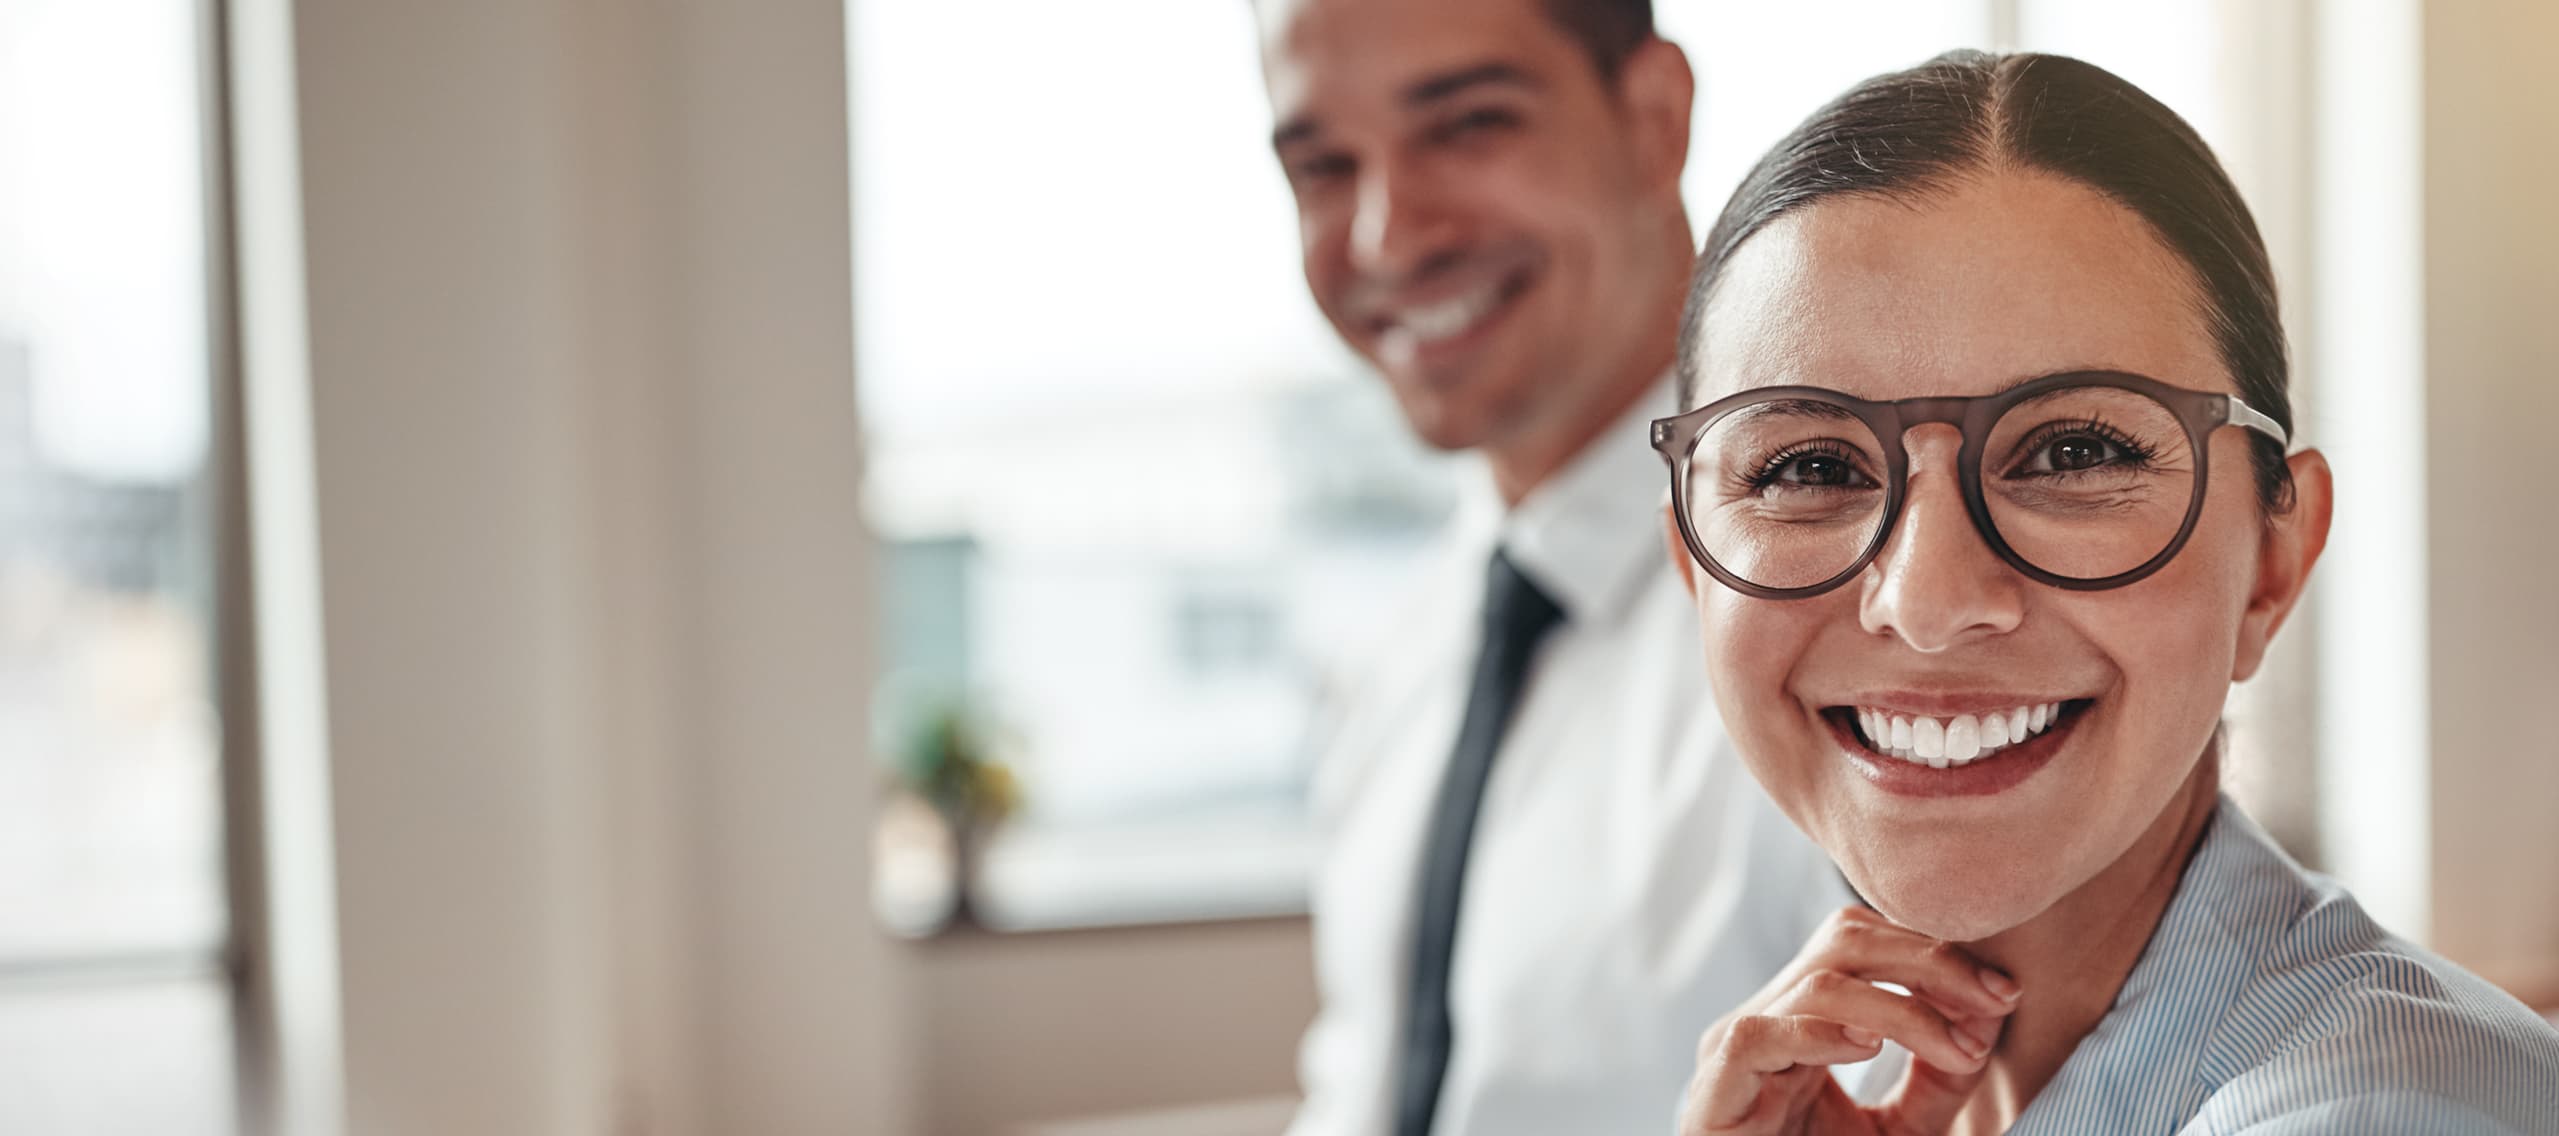 smiling man and woman in business office